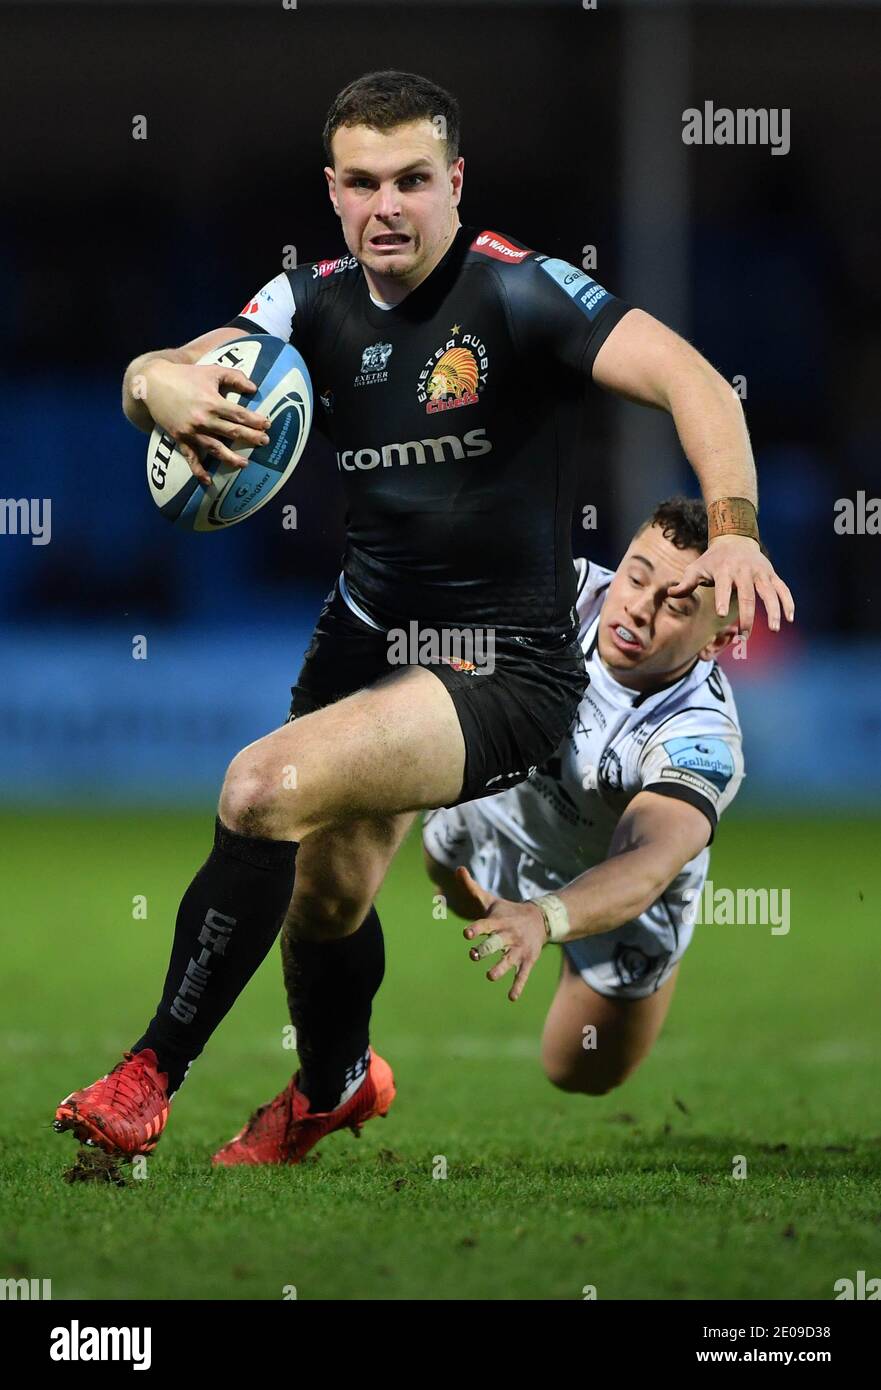 File photo dated 26/12/20 of Exeter Chiefs' captain Joe Simmonds who has been awarded an MBE for services to Rugby Union Football in the New Year's Honours List. Stock Photo